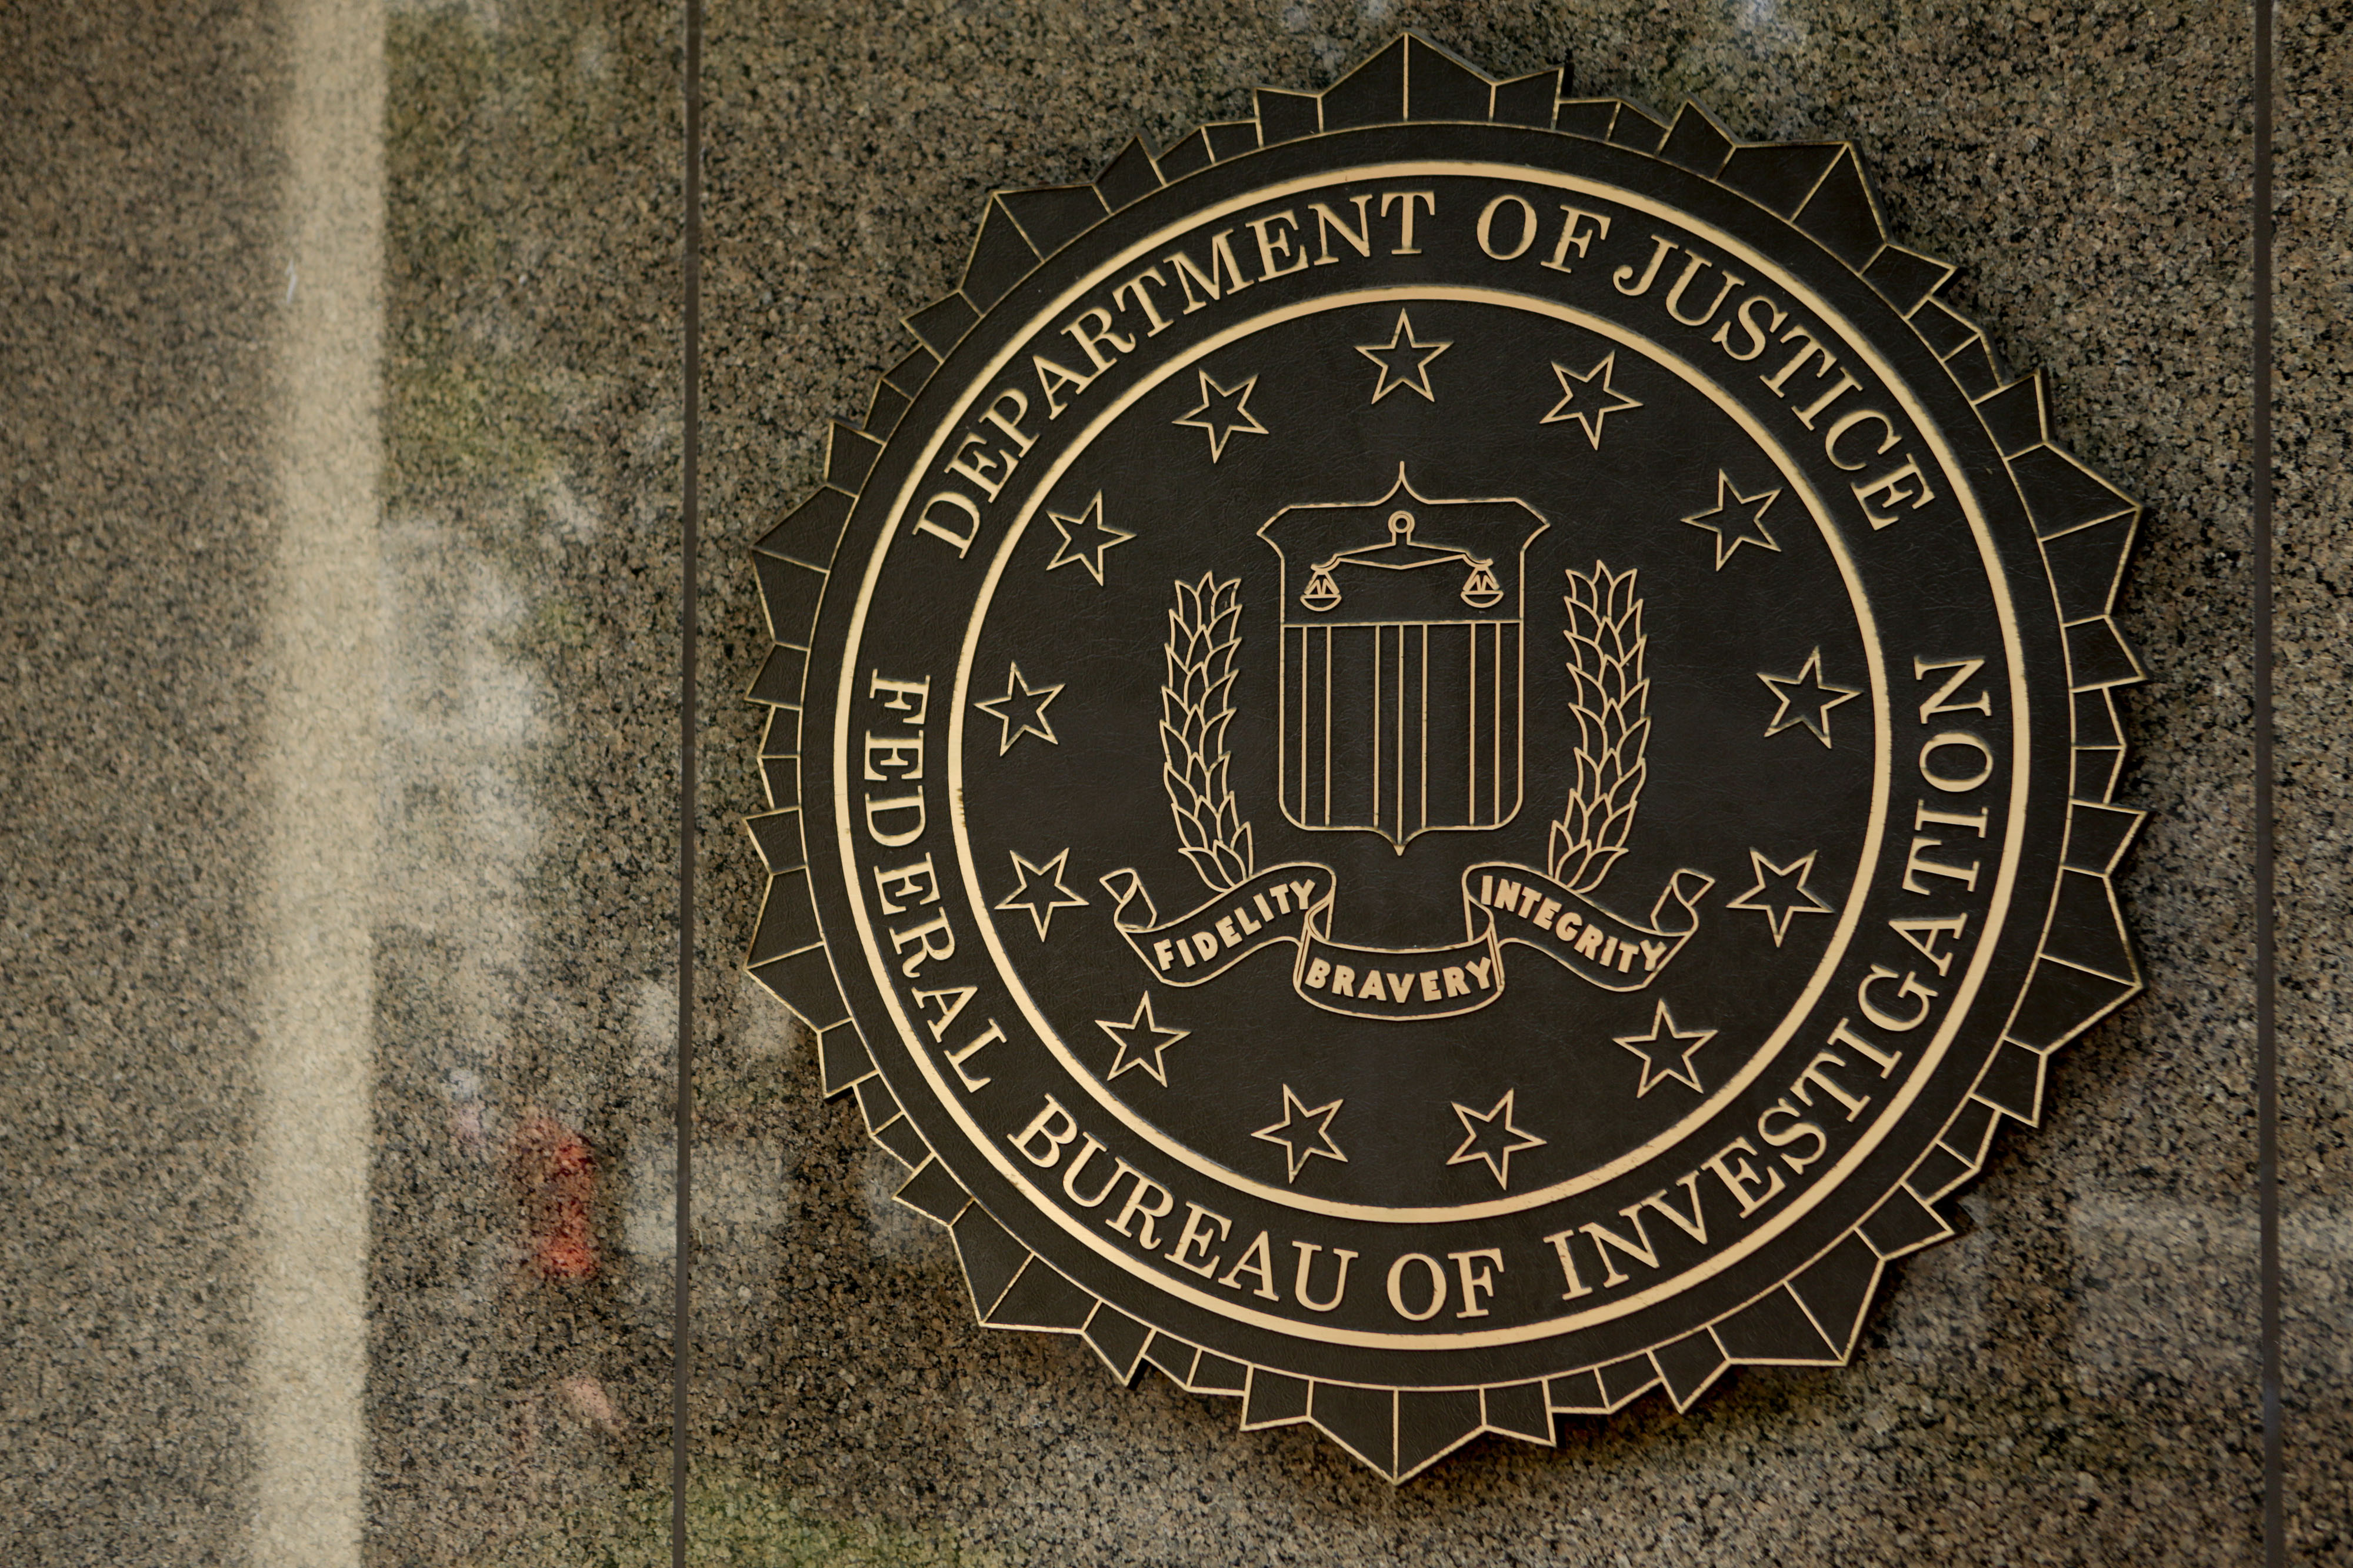 The seal of the Federal Bureau of Investigation (FBI) is seen at the J. Edgar Hoover building in Washington, D.C., U.S., on Aug. 8, 2013. (Andrew Harrer—Bloomberg/Getty Images)